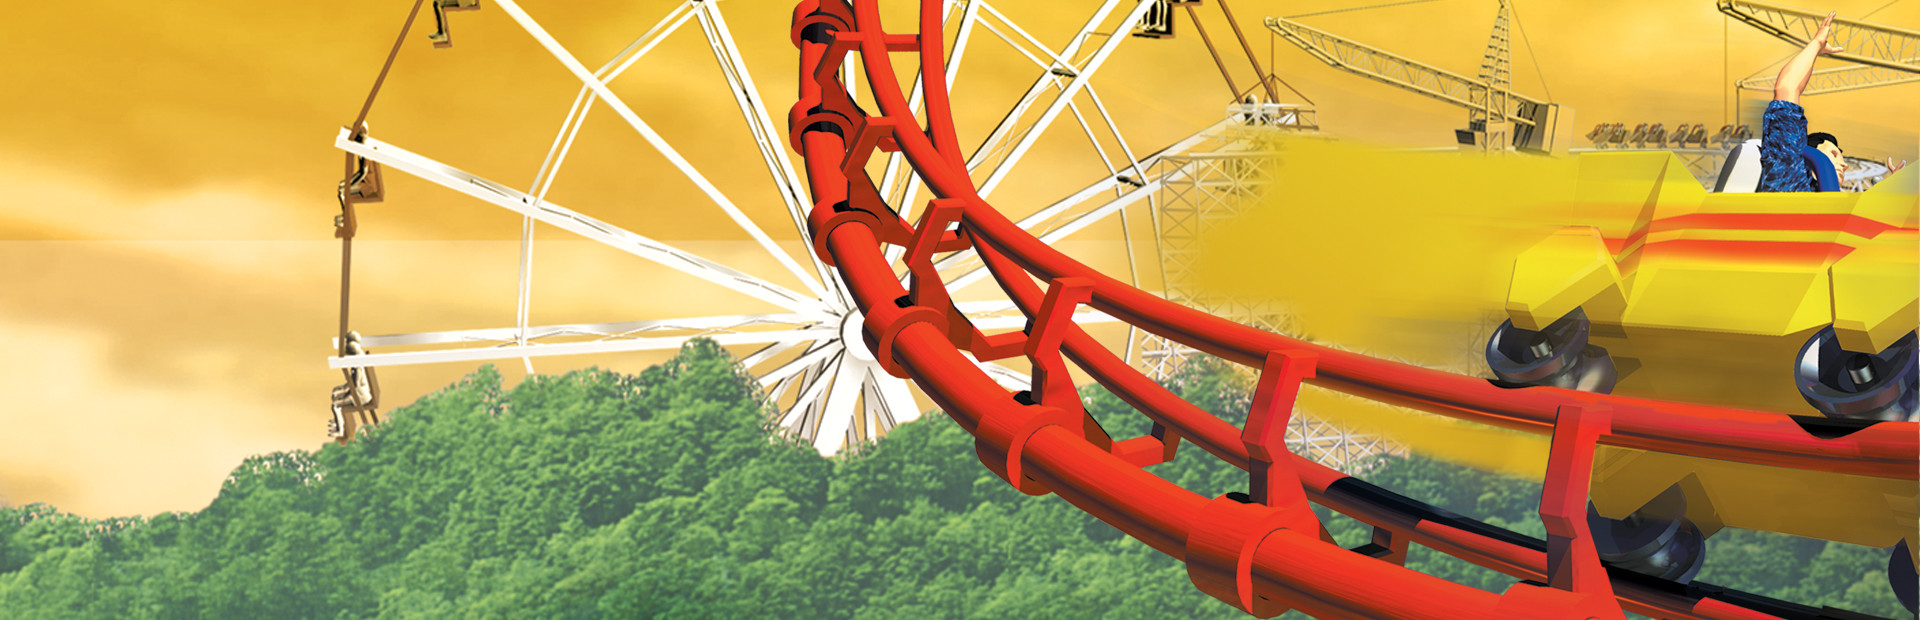 RollerCoaster Tycoon®: Deluxe cover image